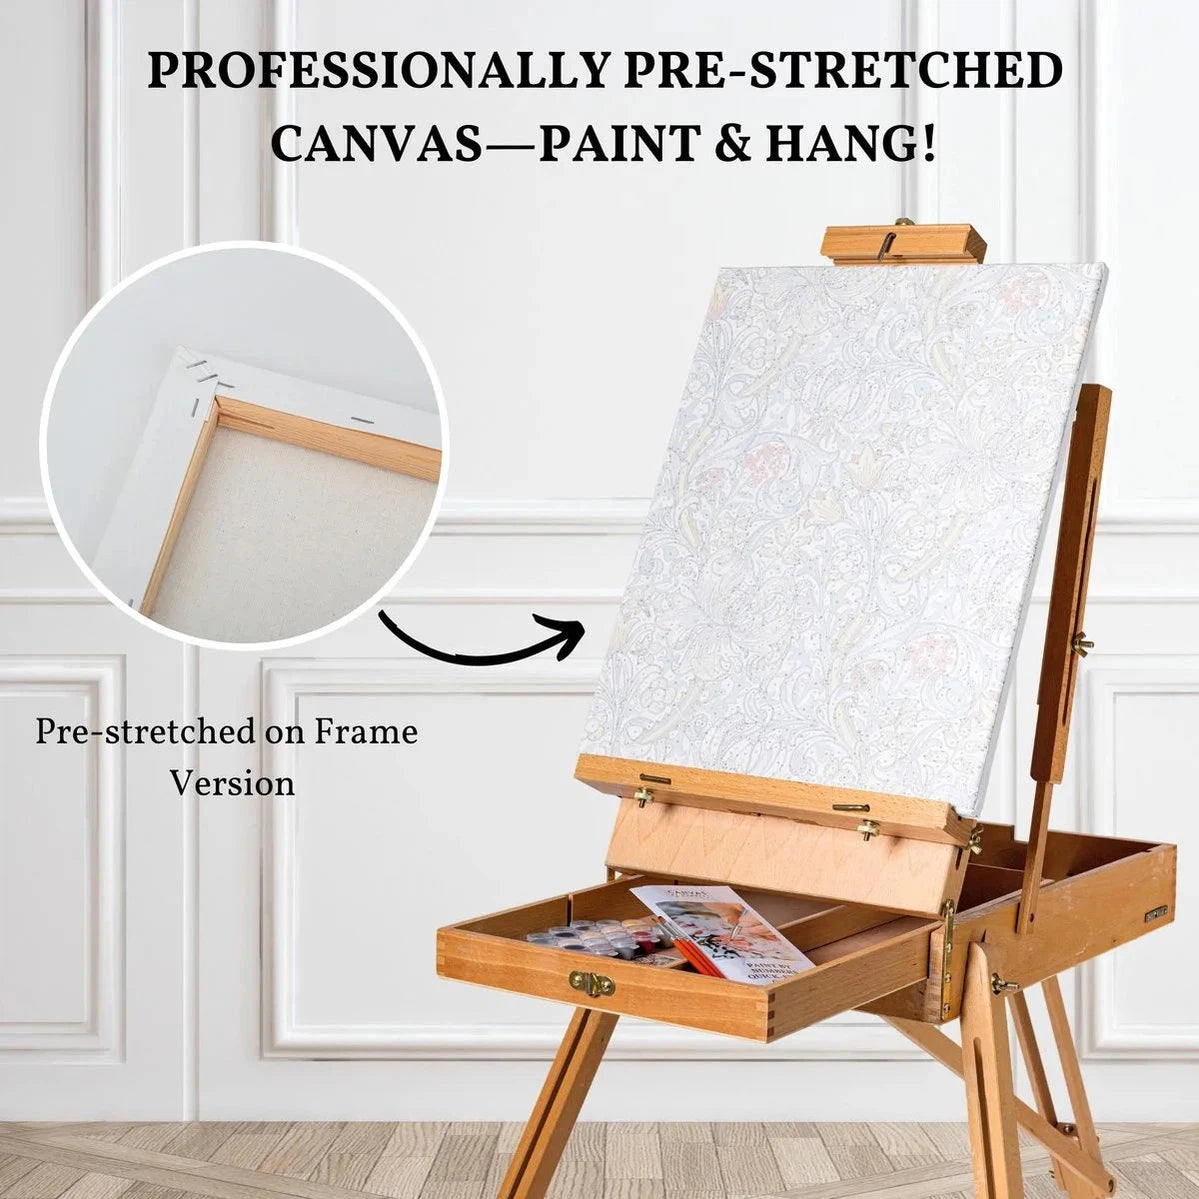 Blank Custom Stretched Canvas for Painting - Artist Grade and